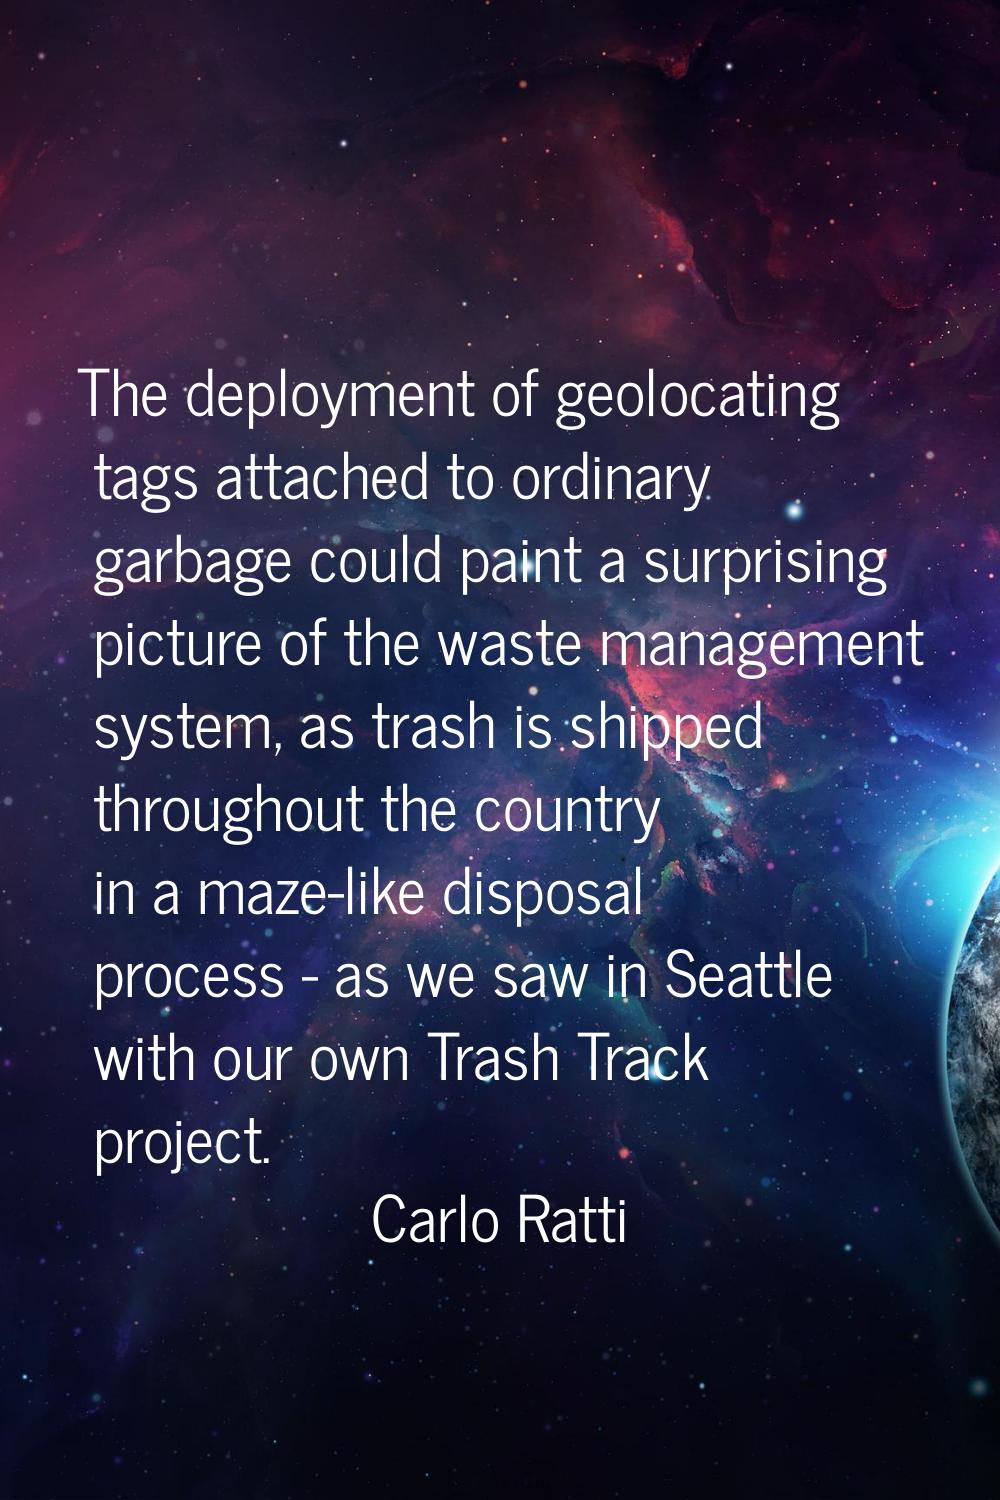 The deployment of geolocating tags attached to ordinary garbage could paint a surprising picture of